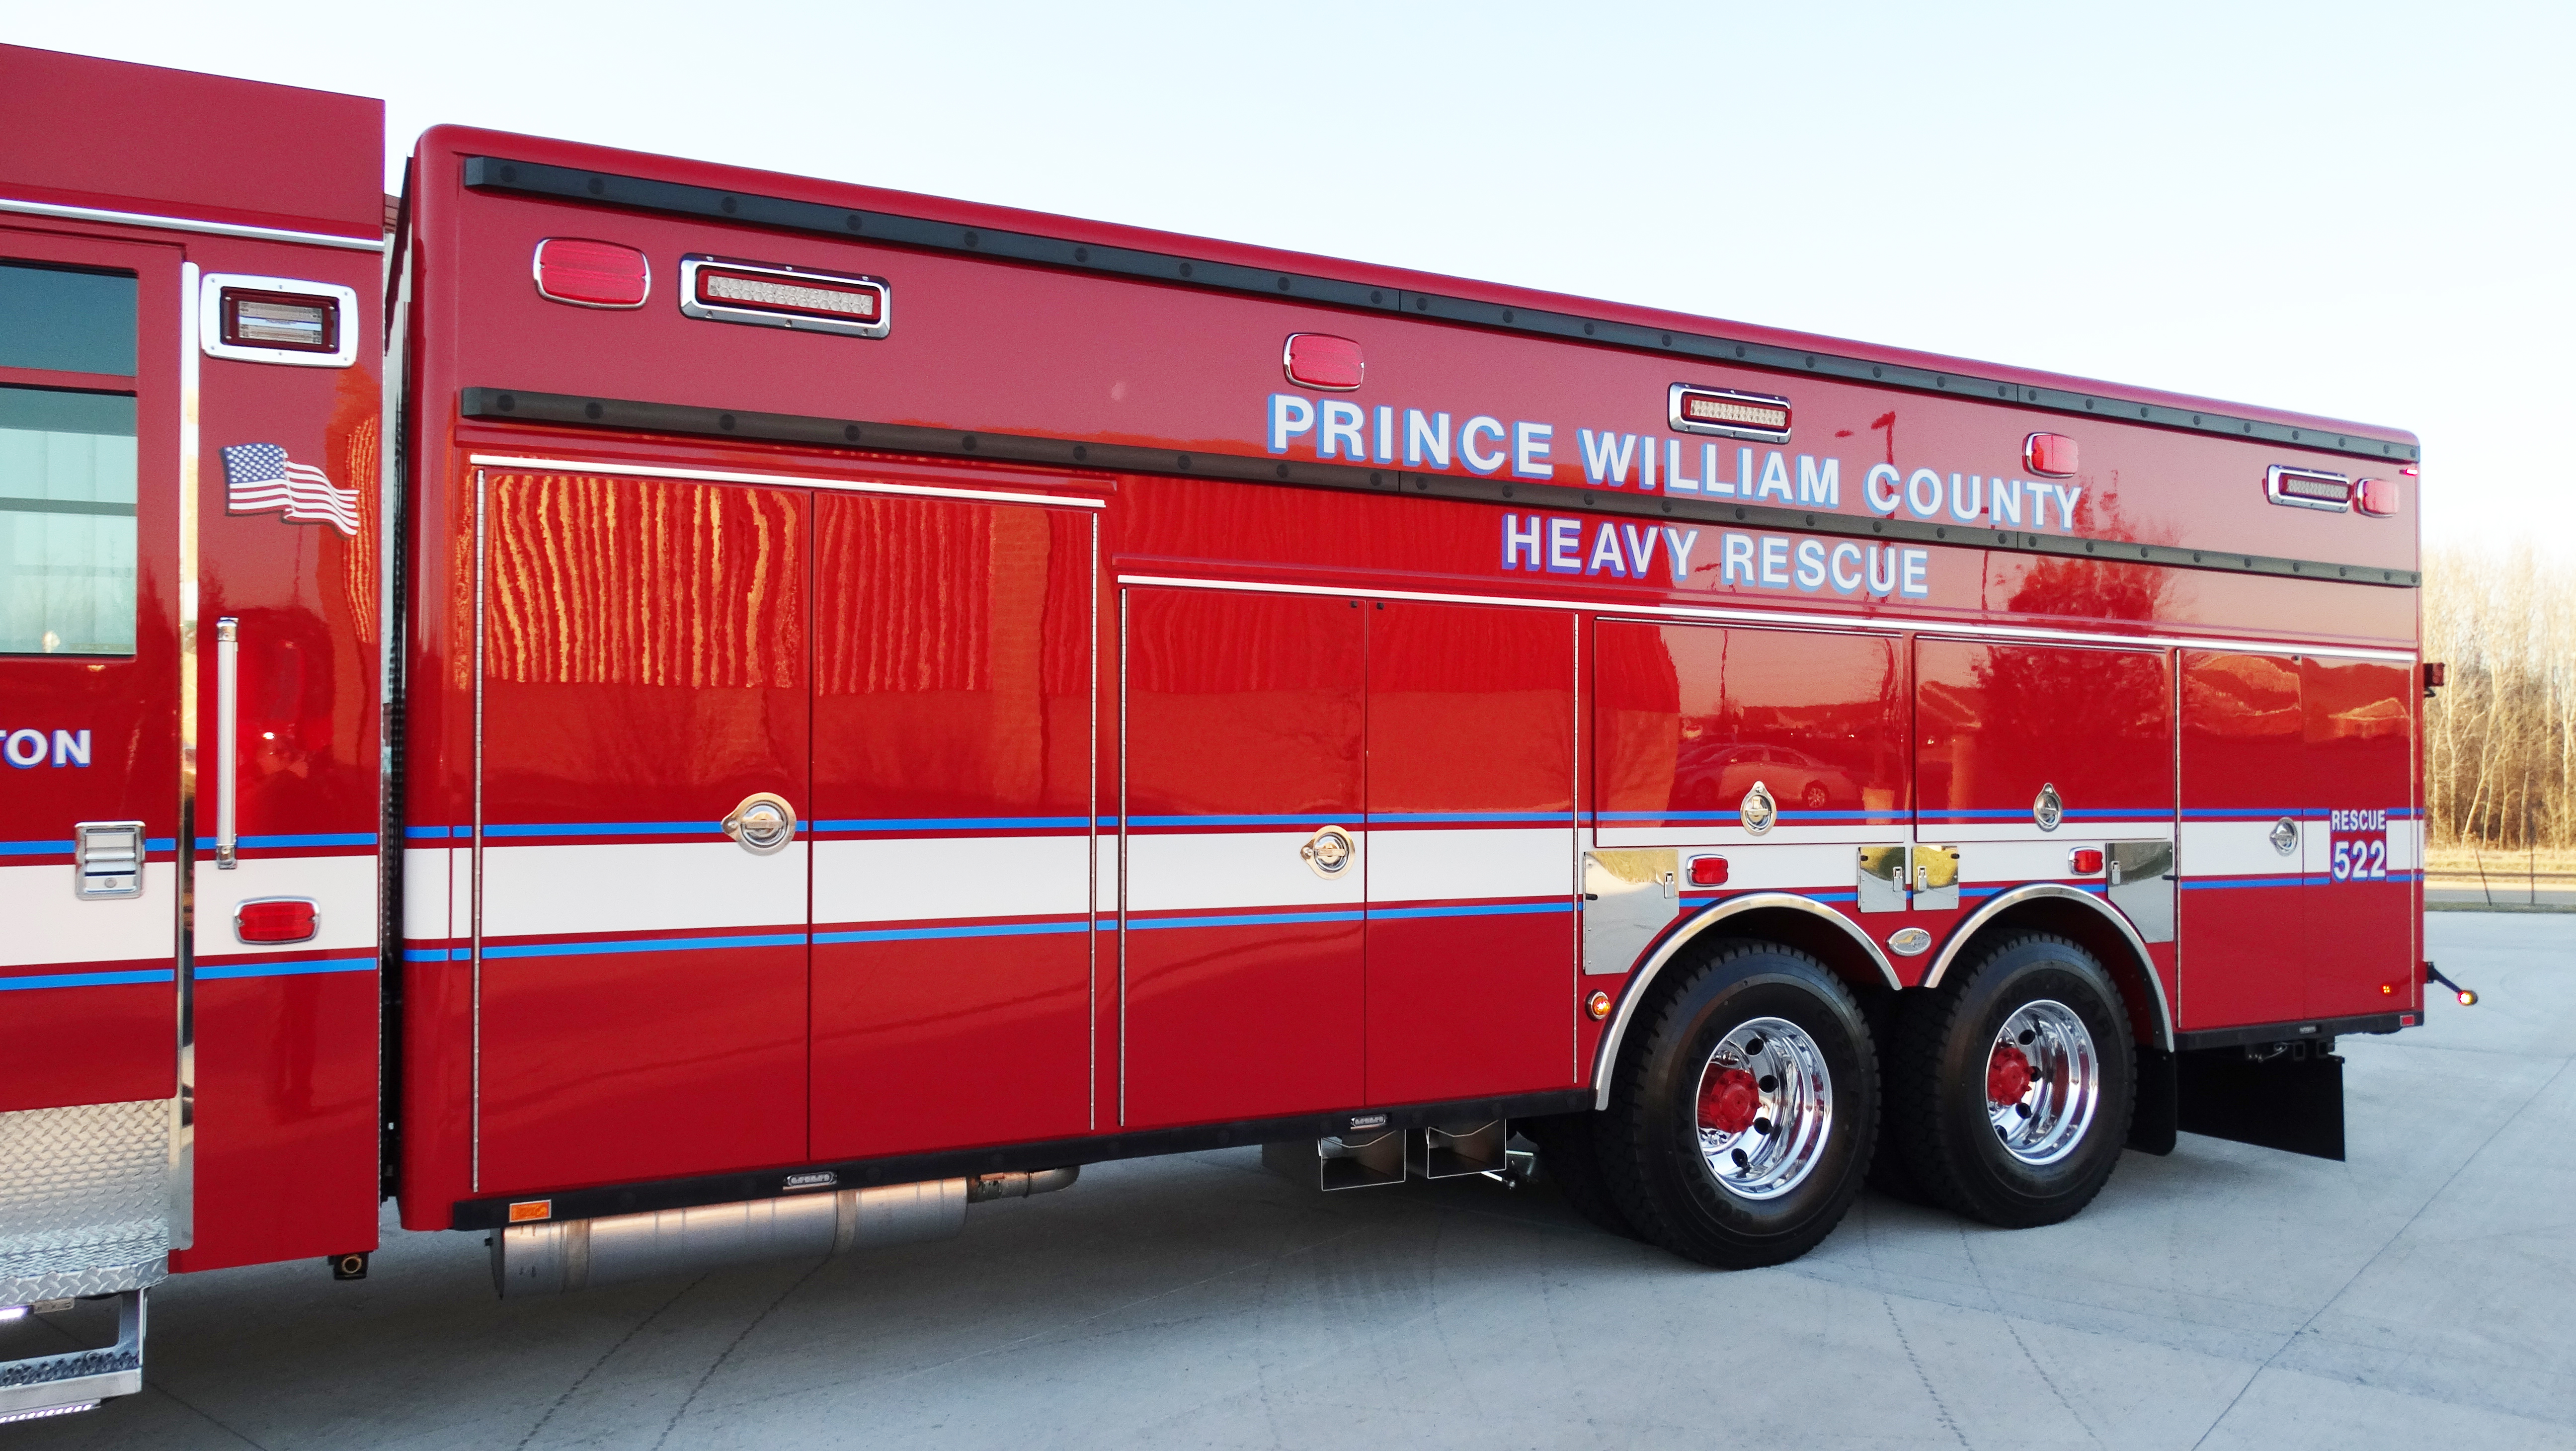 Officer’s side of a Pierce Combination Rescue Fire Truck for Prince William County parked outside in a parking lot. 